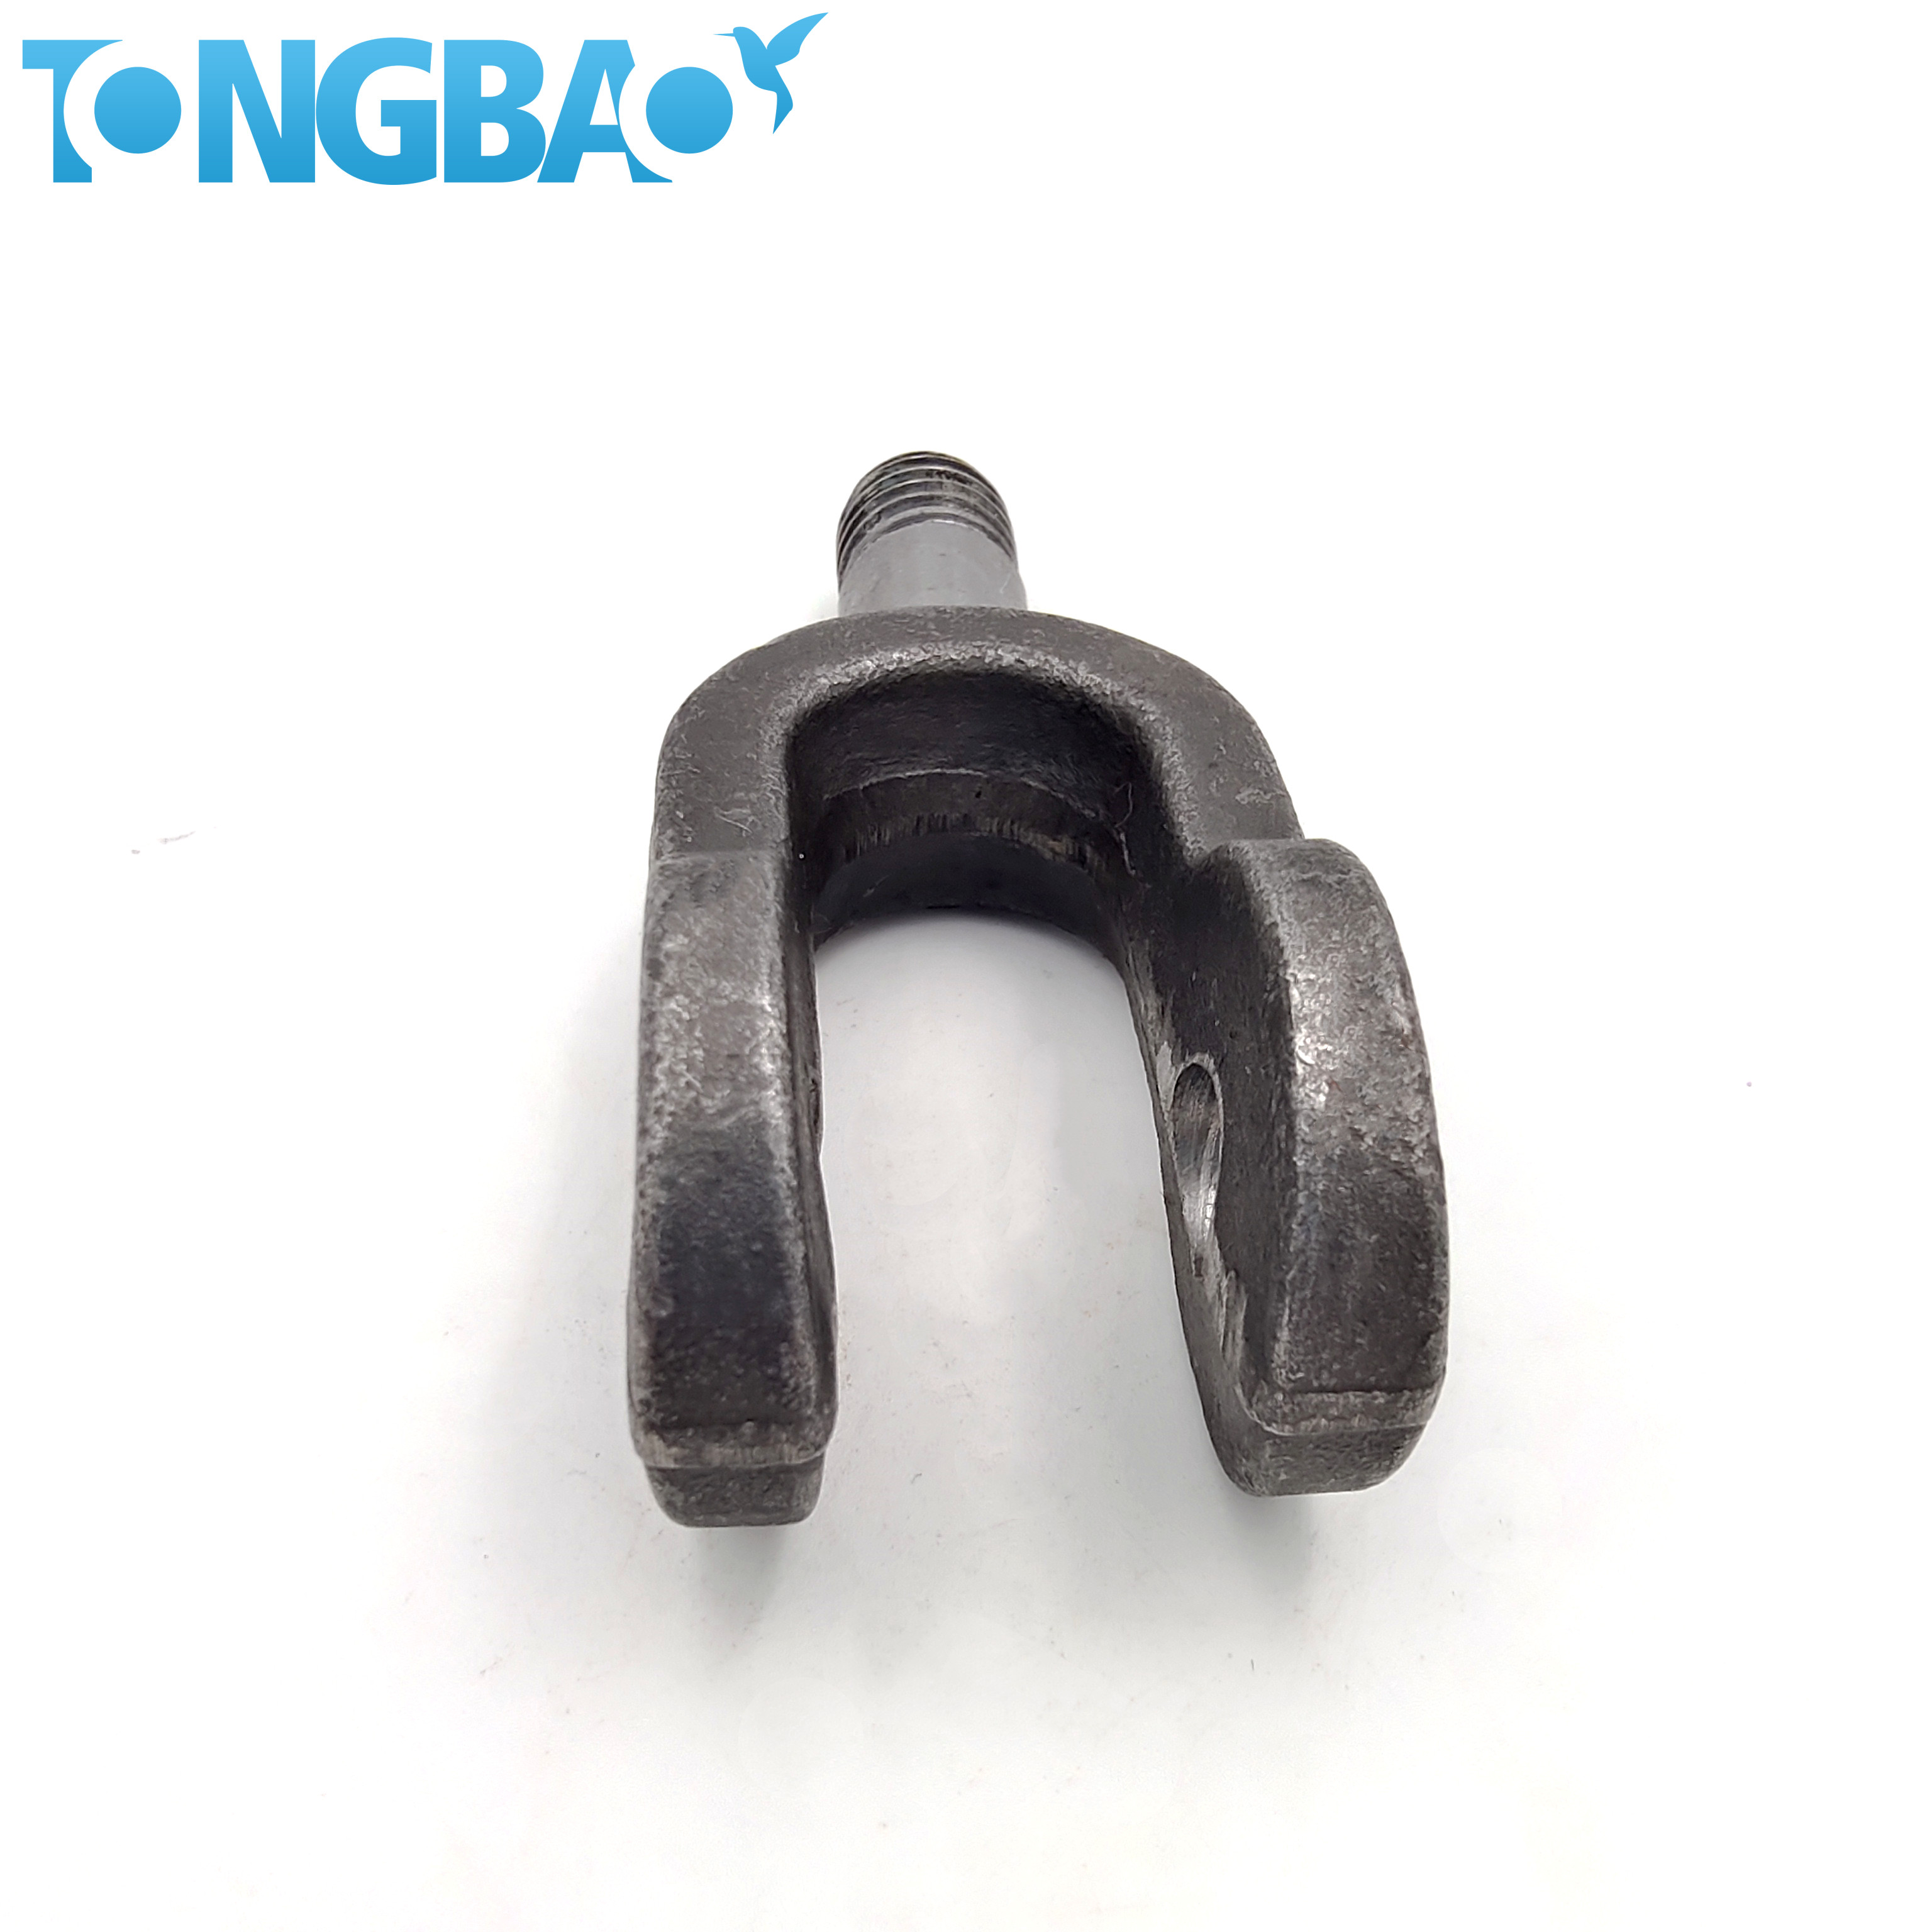 Forged Eye/ Yoke for Lifting Machinery and Equipment